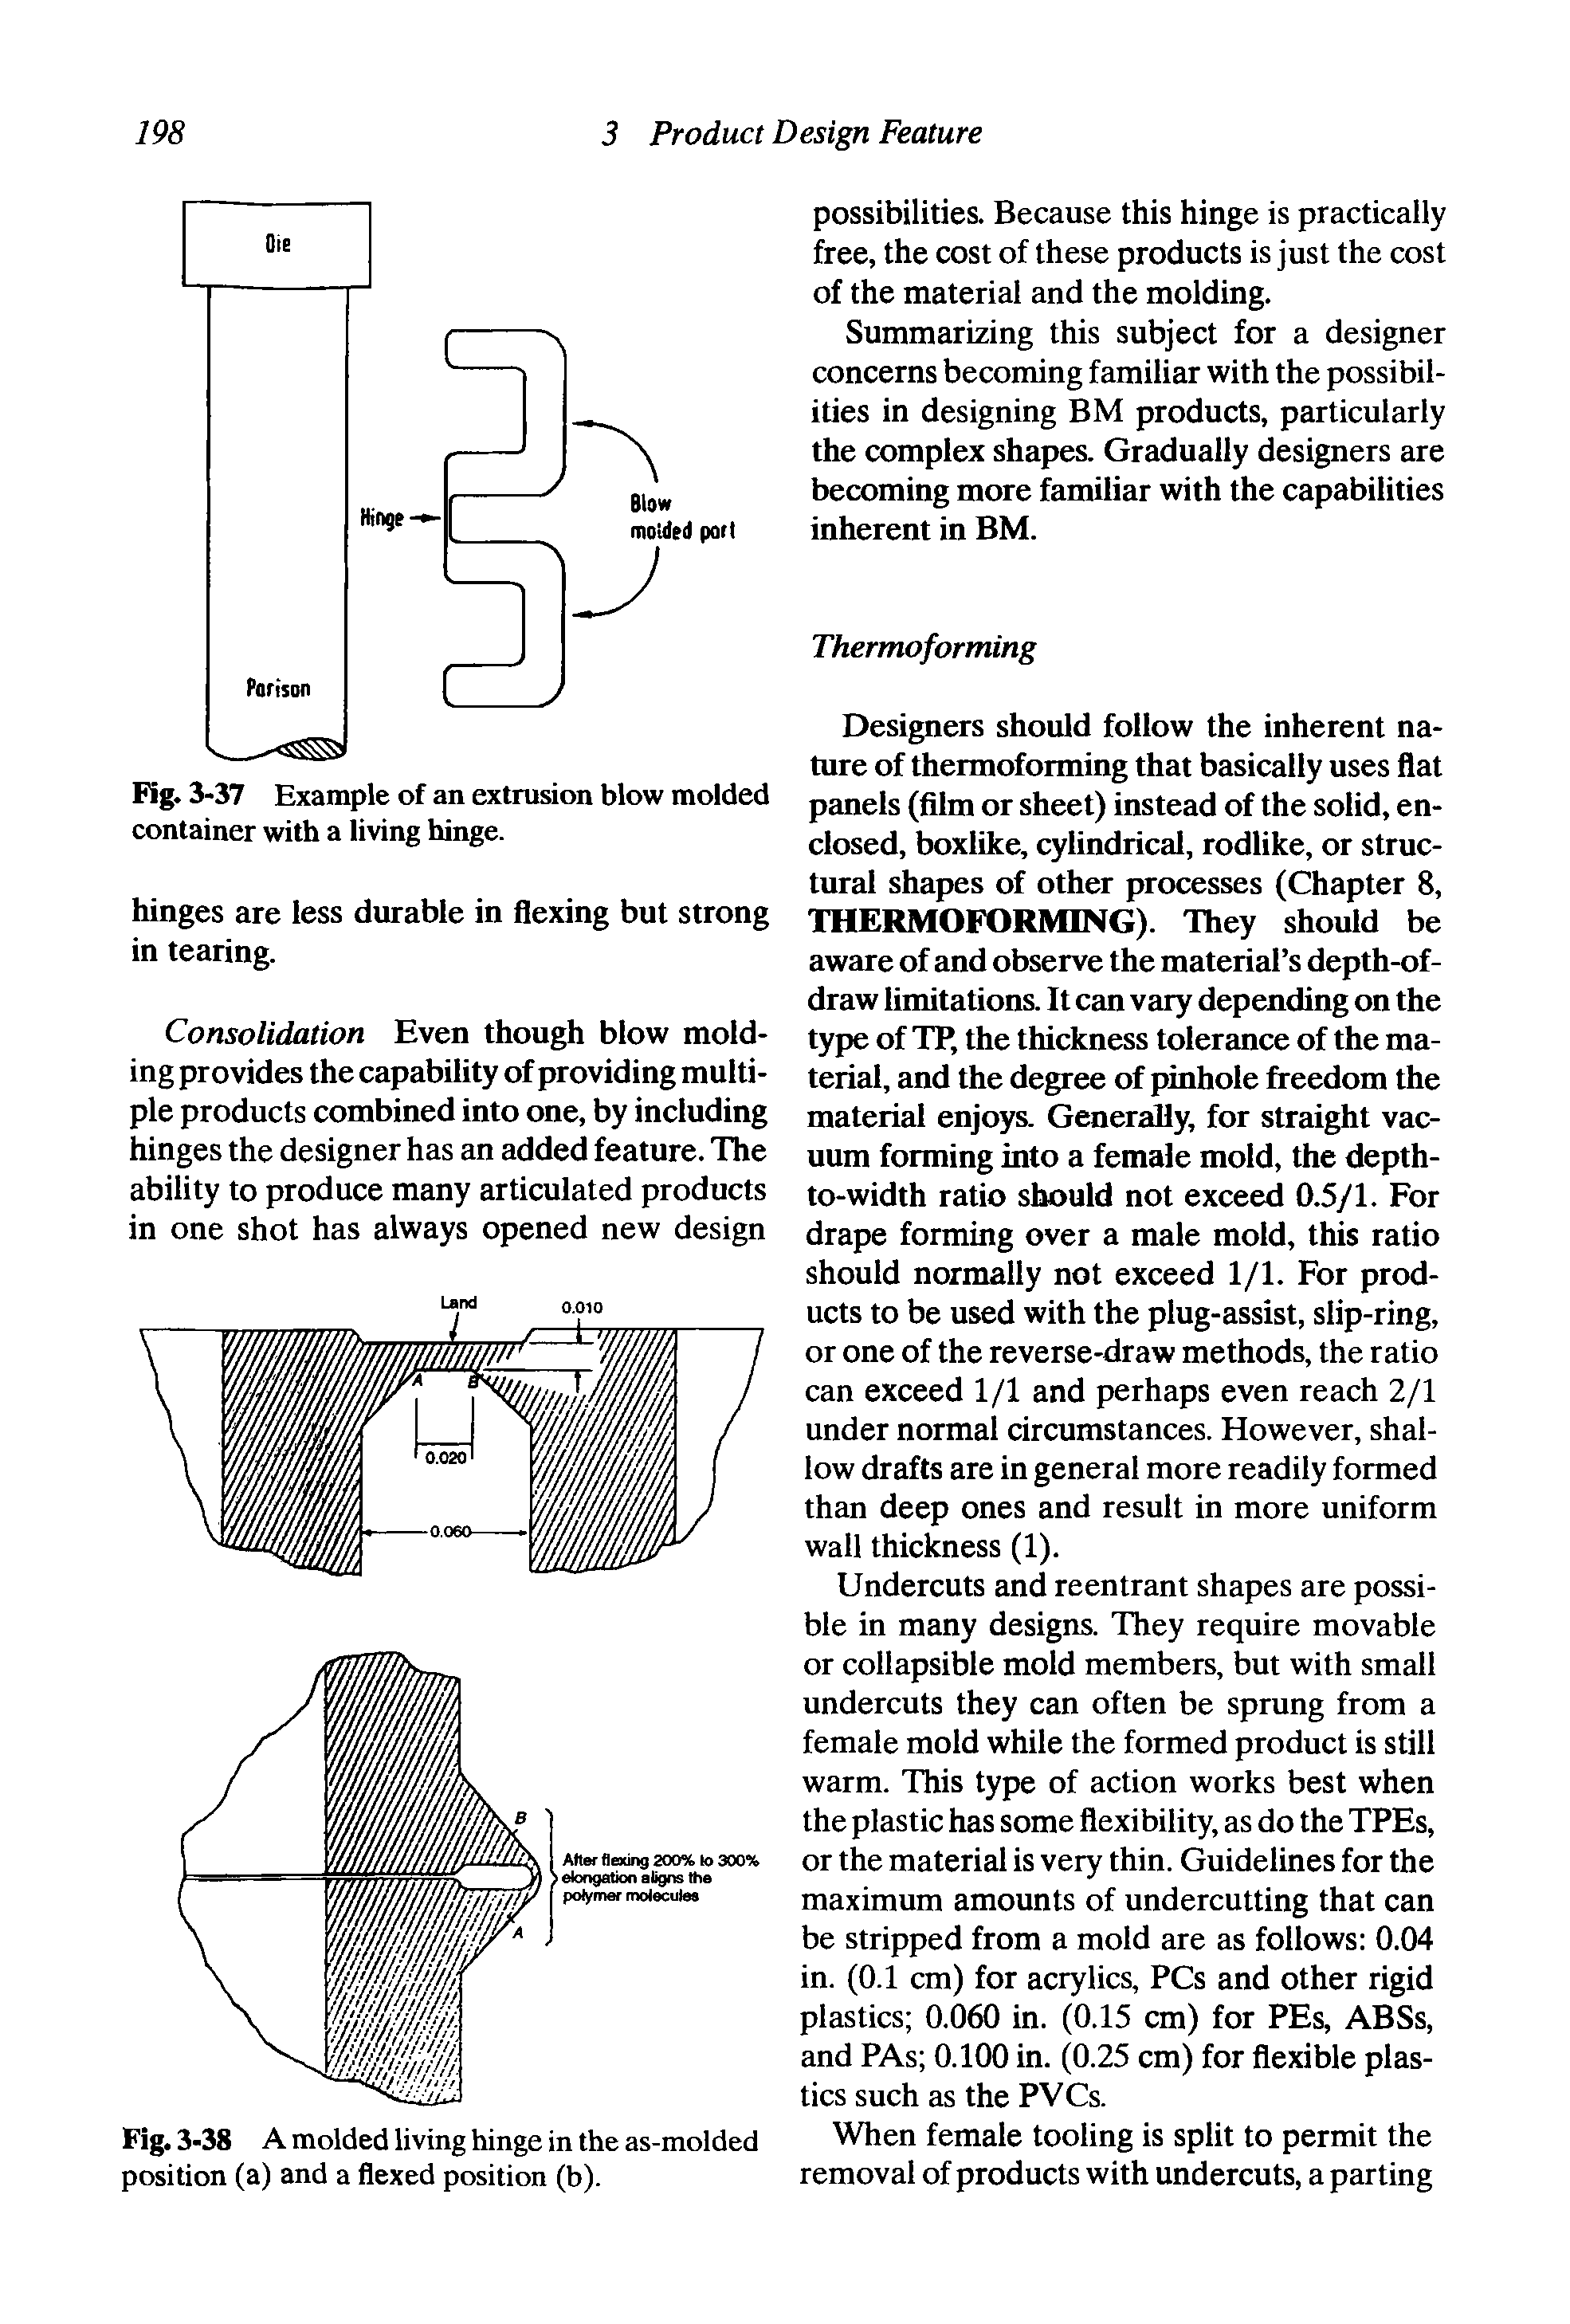 Fig. 3-37 Example of an extrusion blow molded container with a living hinge.